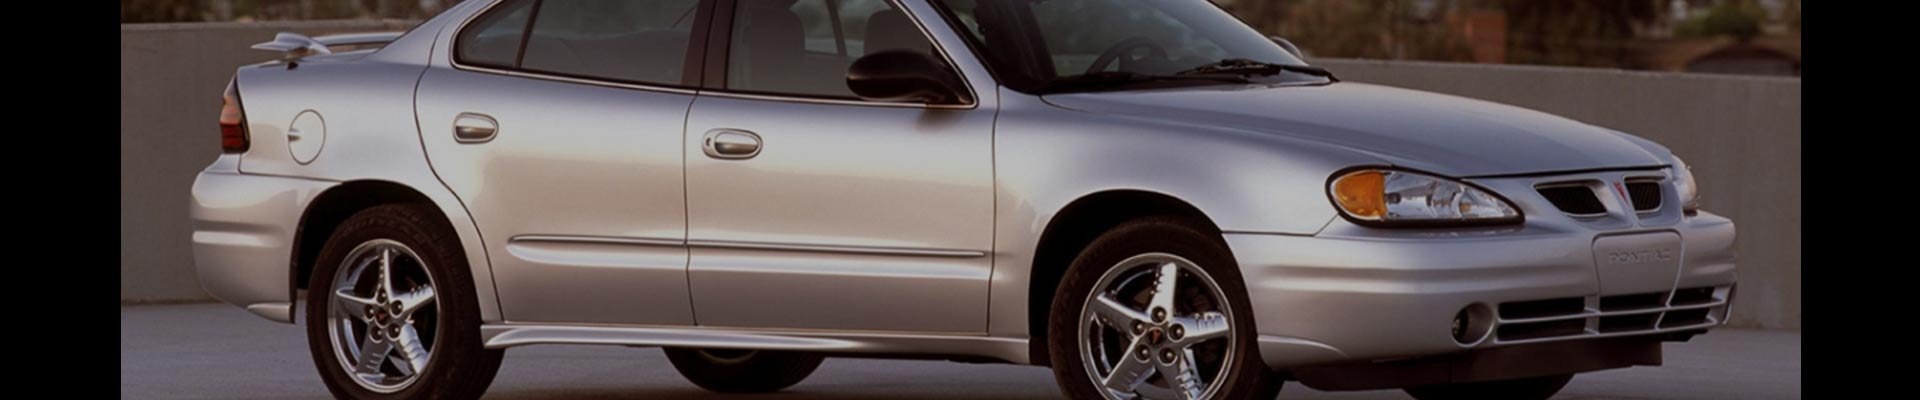 Shop Replacement and OEM 1995 Pontiac Grand Am Parts with Discounted Price on the Net